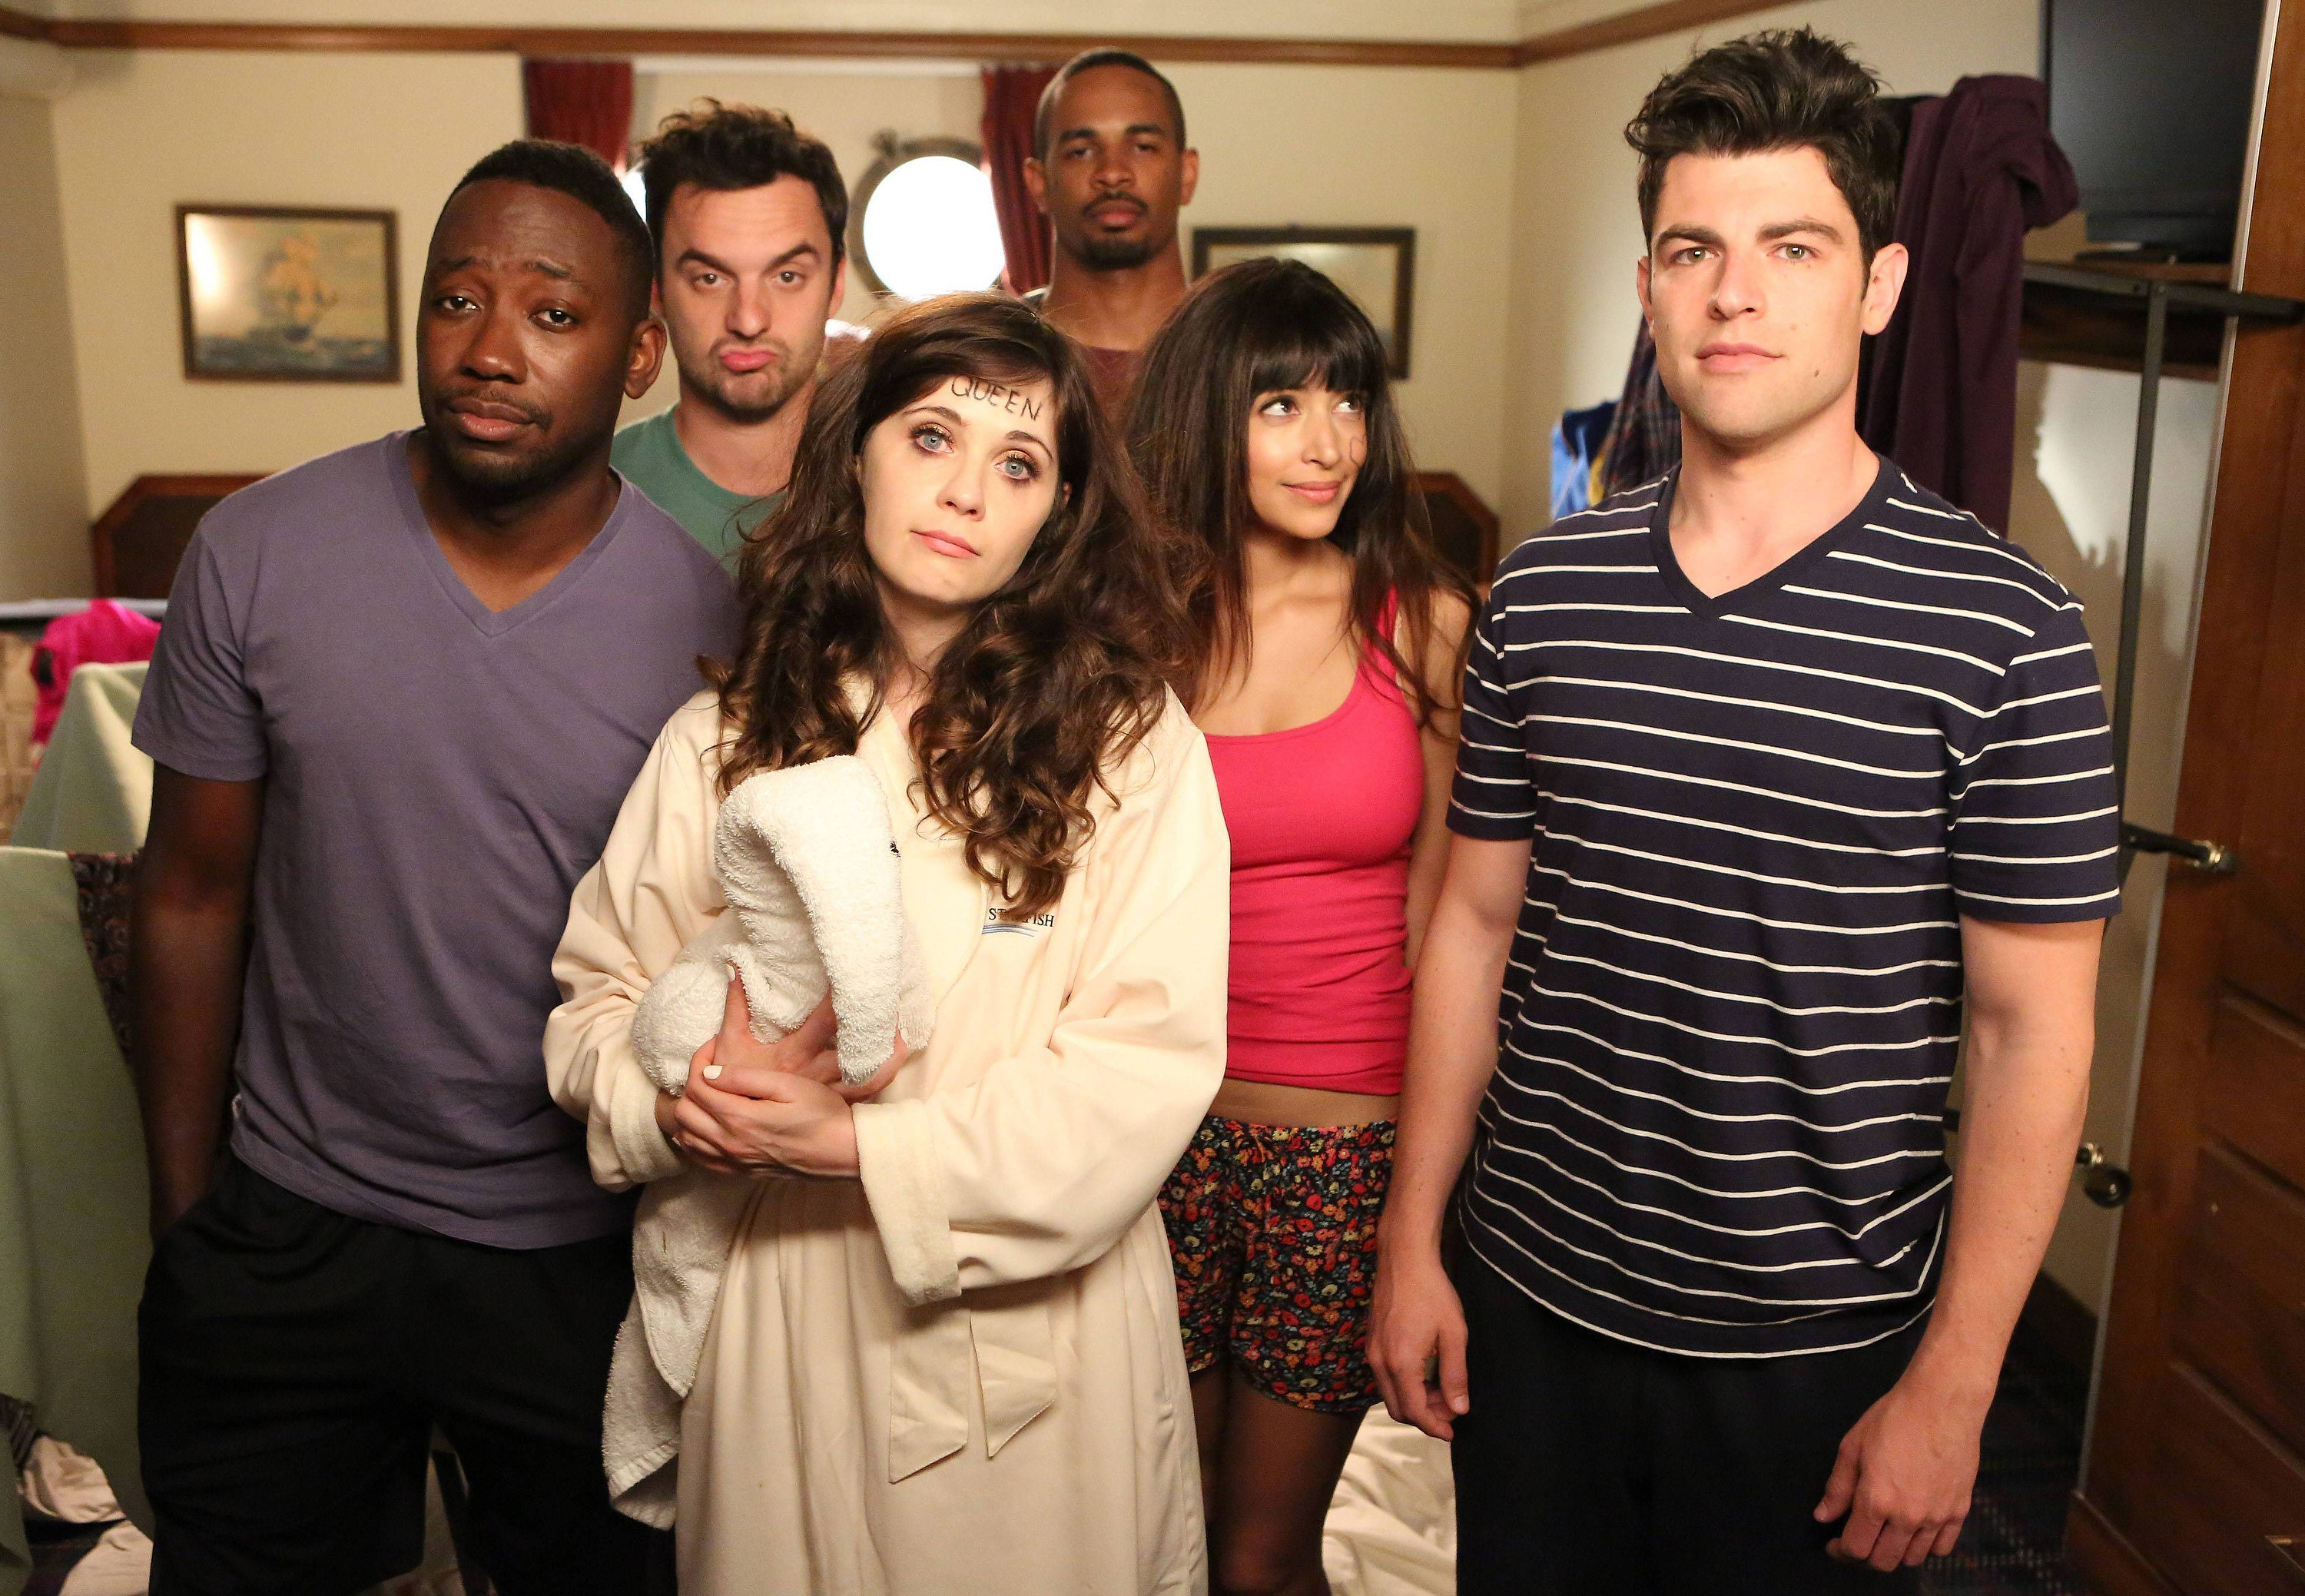 the cast of New Girl